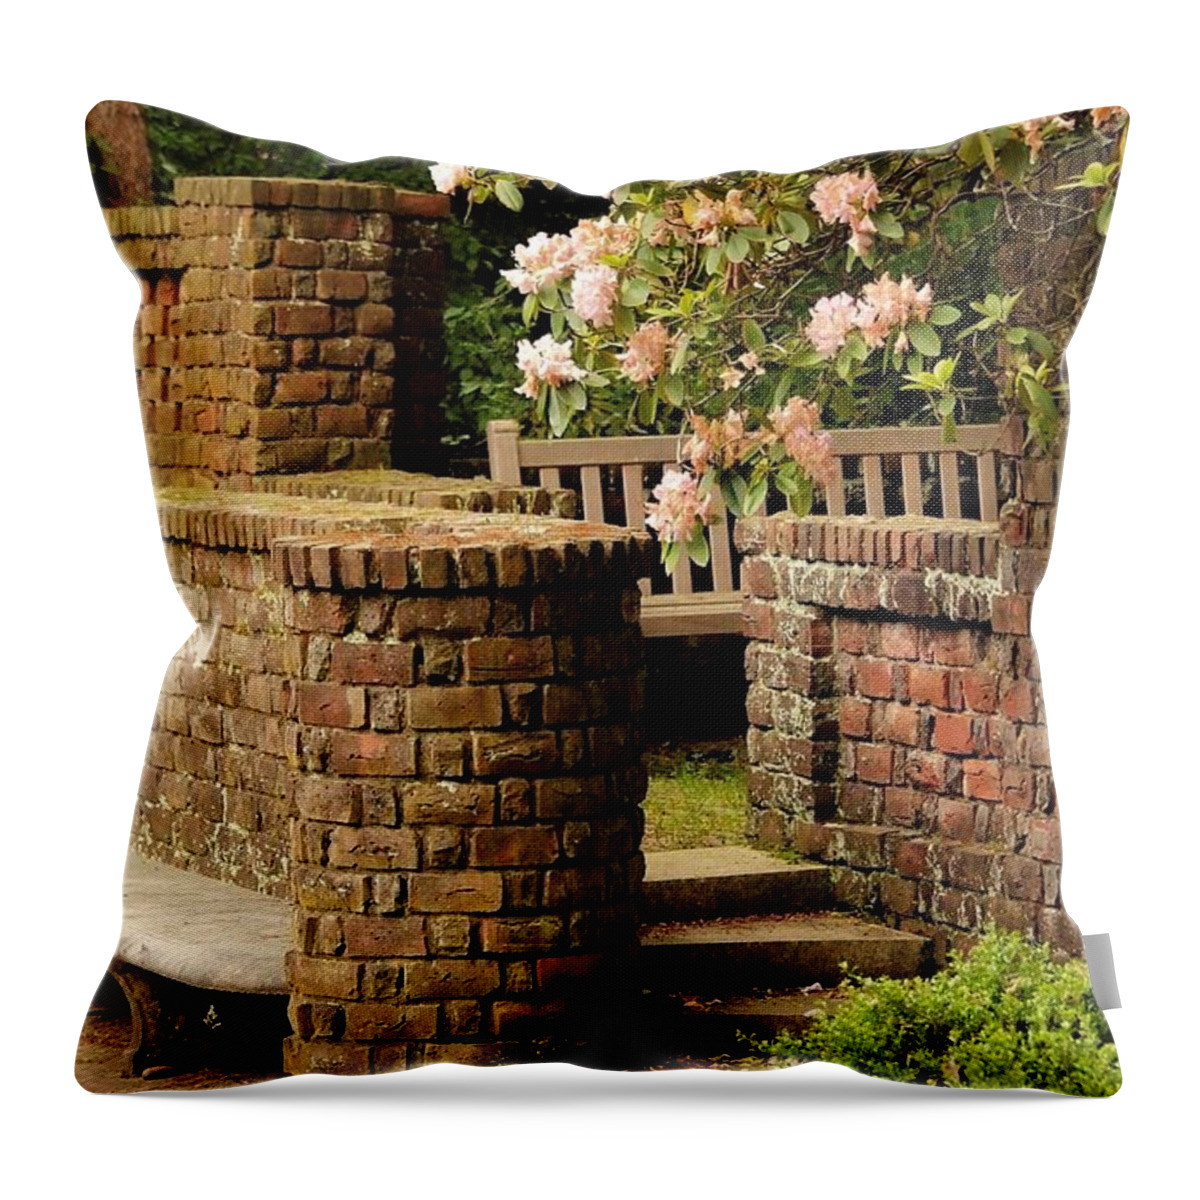 Brick Wall Bench Stairs Flowers Throw Pillow featuring the photograph Brick Walls1 by John Linnemeyer